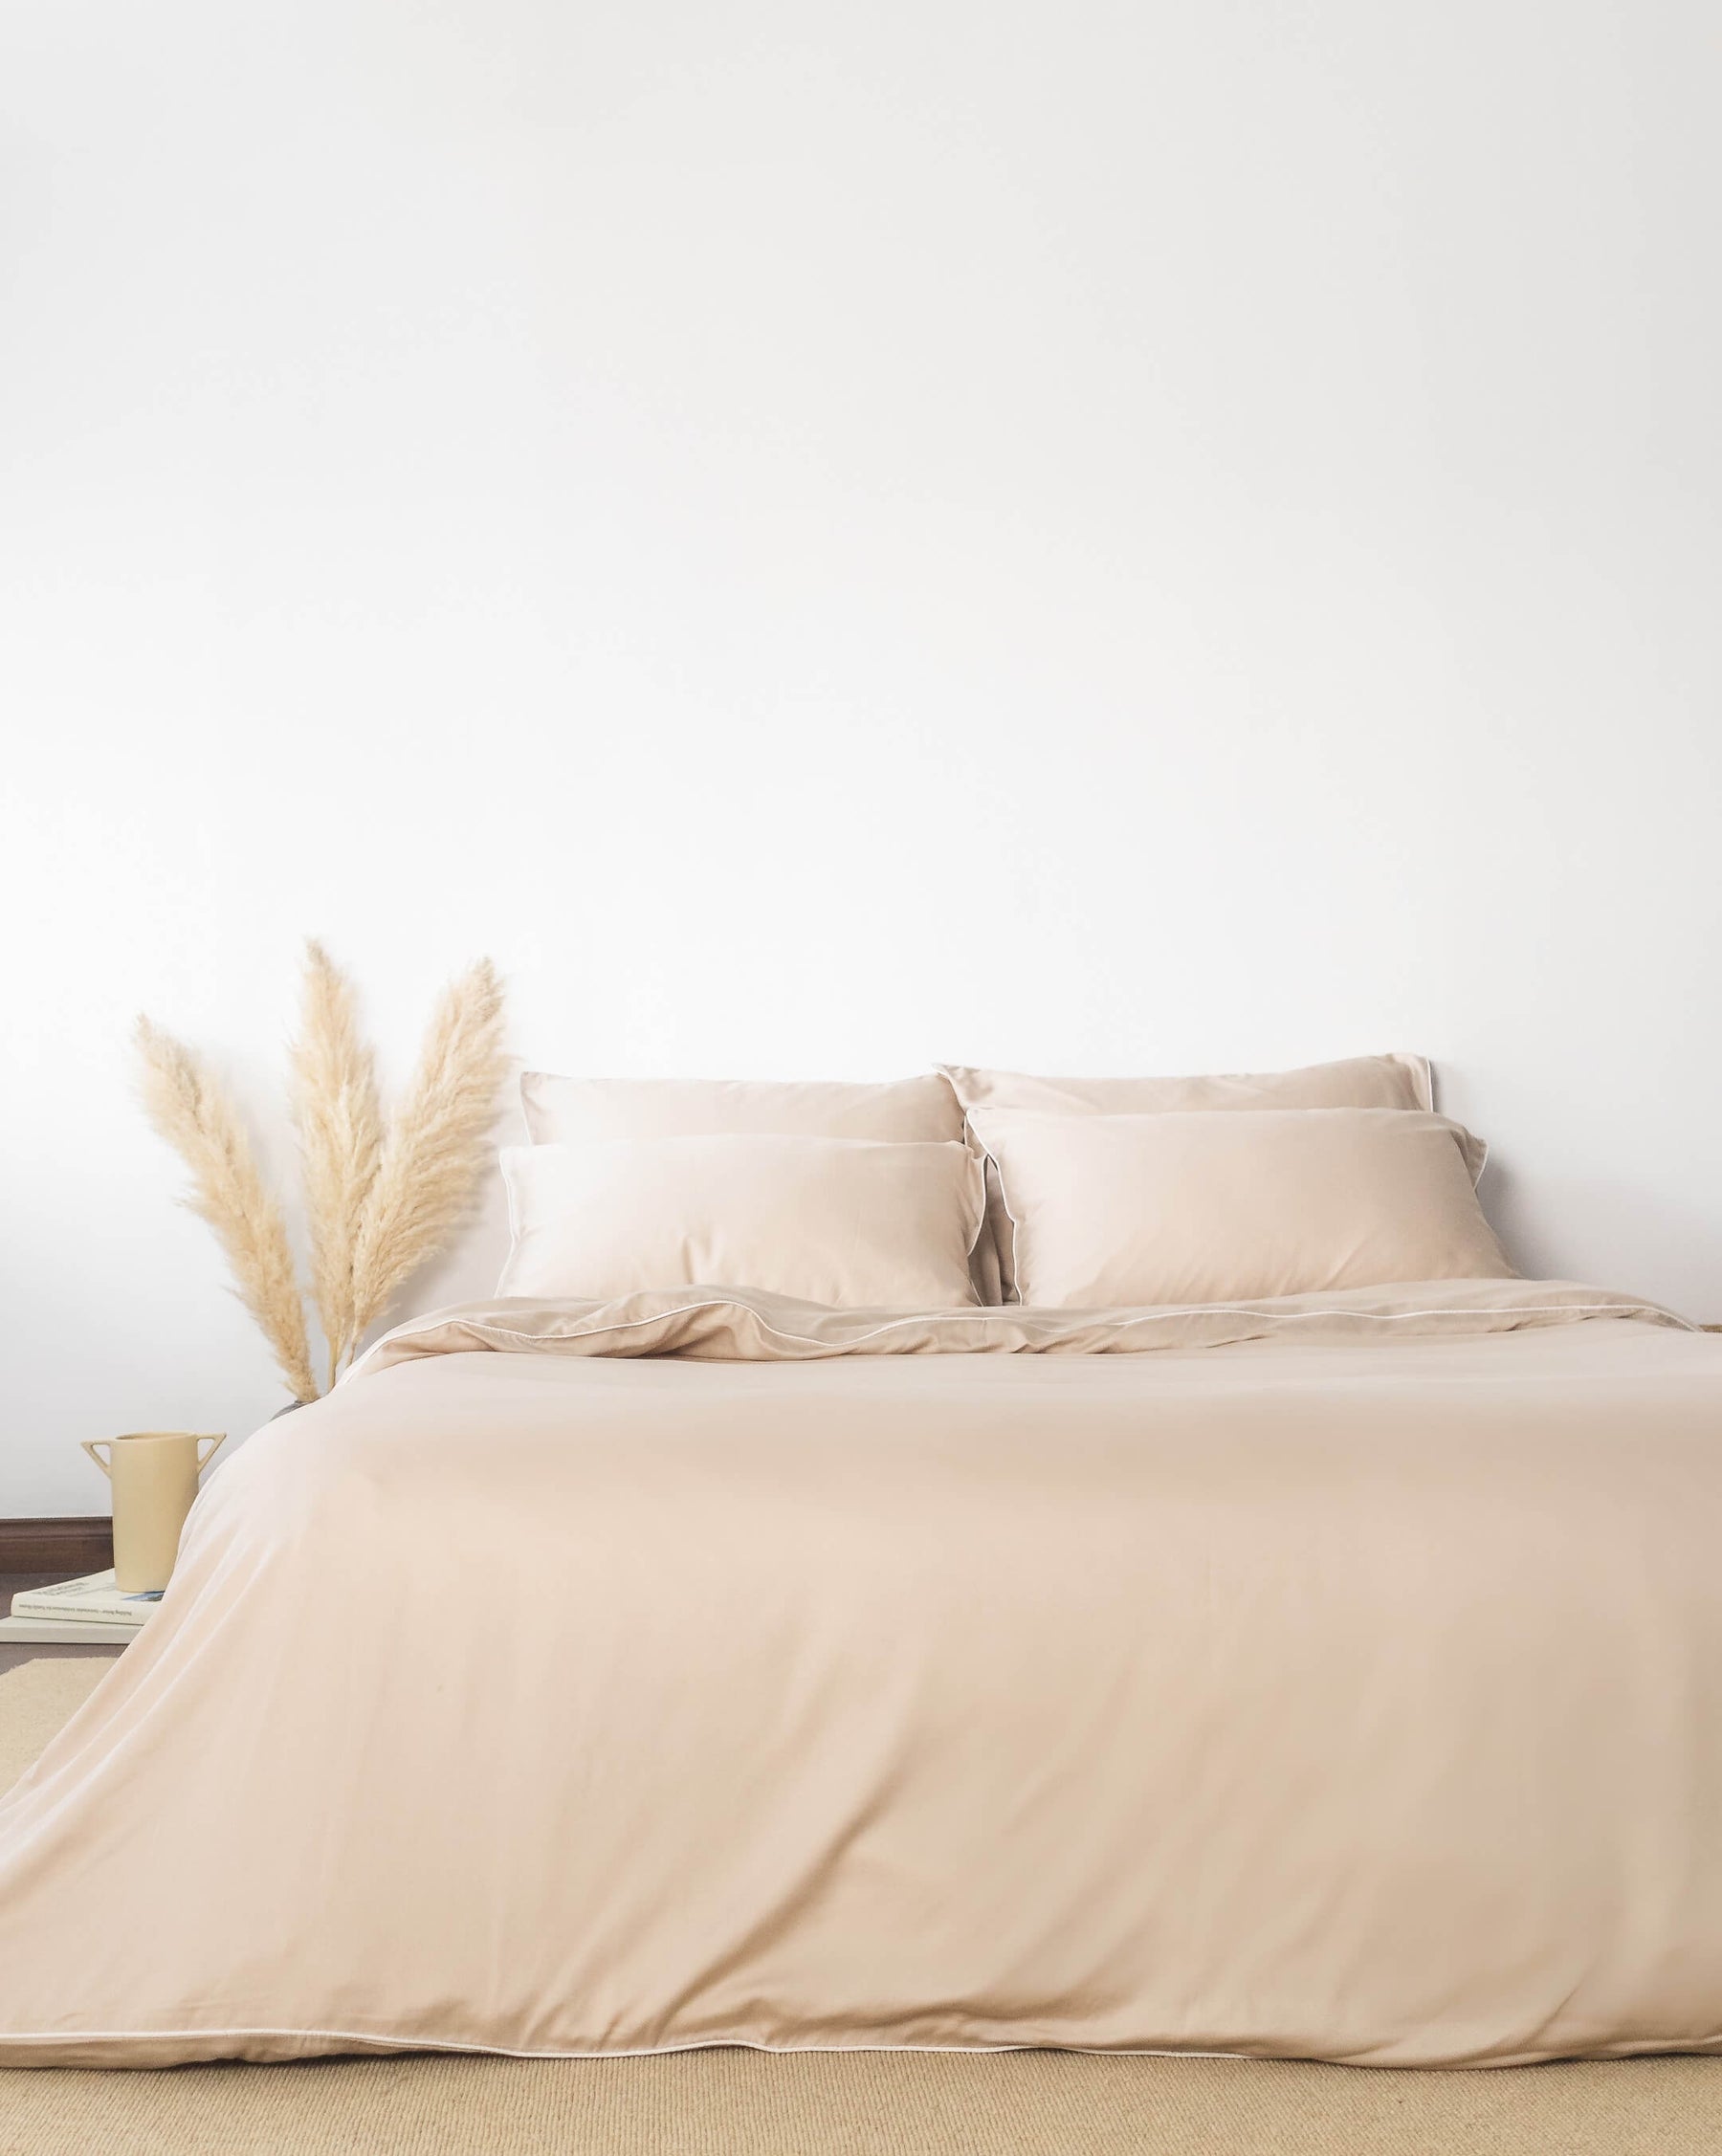 ava and ava ph organic bamboo lyocell duvet cover sheet set pillowcases in sand beige with white piping decorated with pampas summer vibes. soft and cooling bedding sheets.